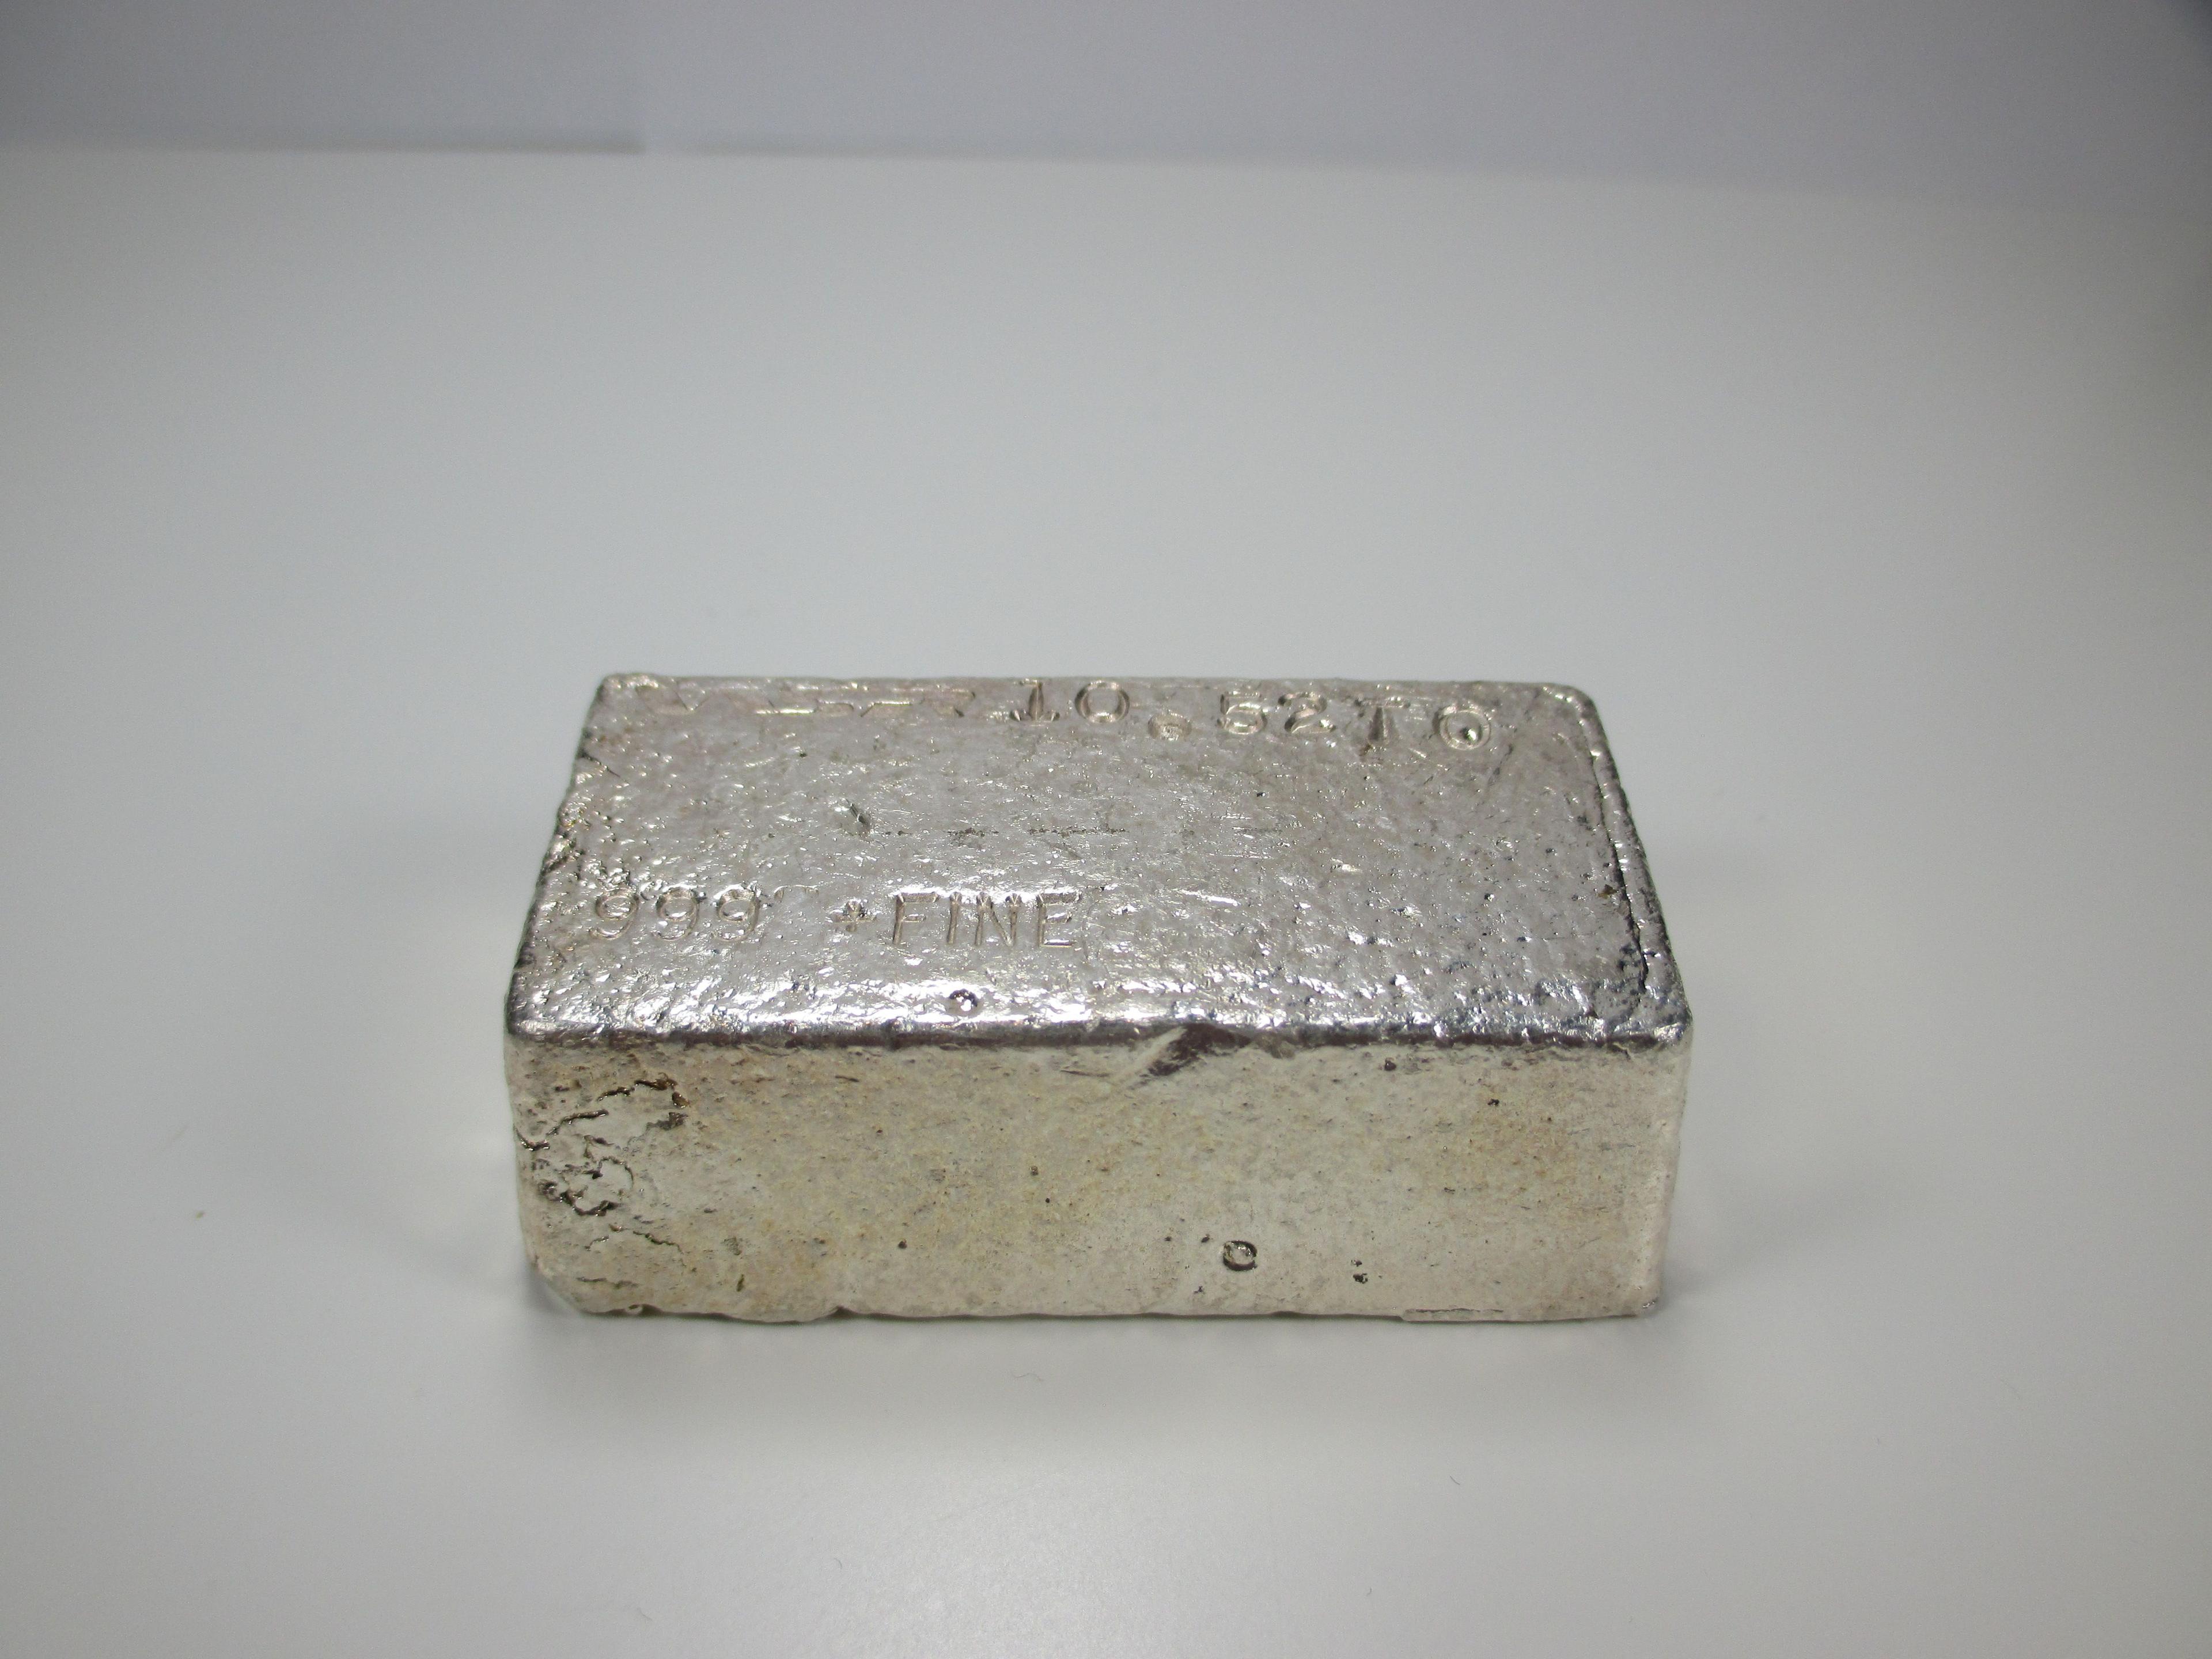 m-16 WSR "Loaf" 10.5 Ounce Poured .999 Silver Bar